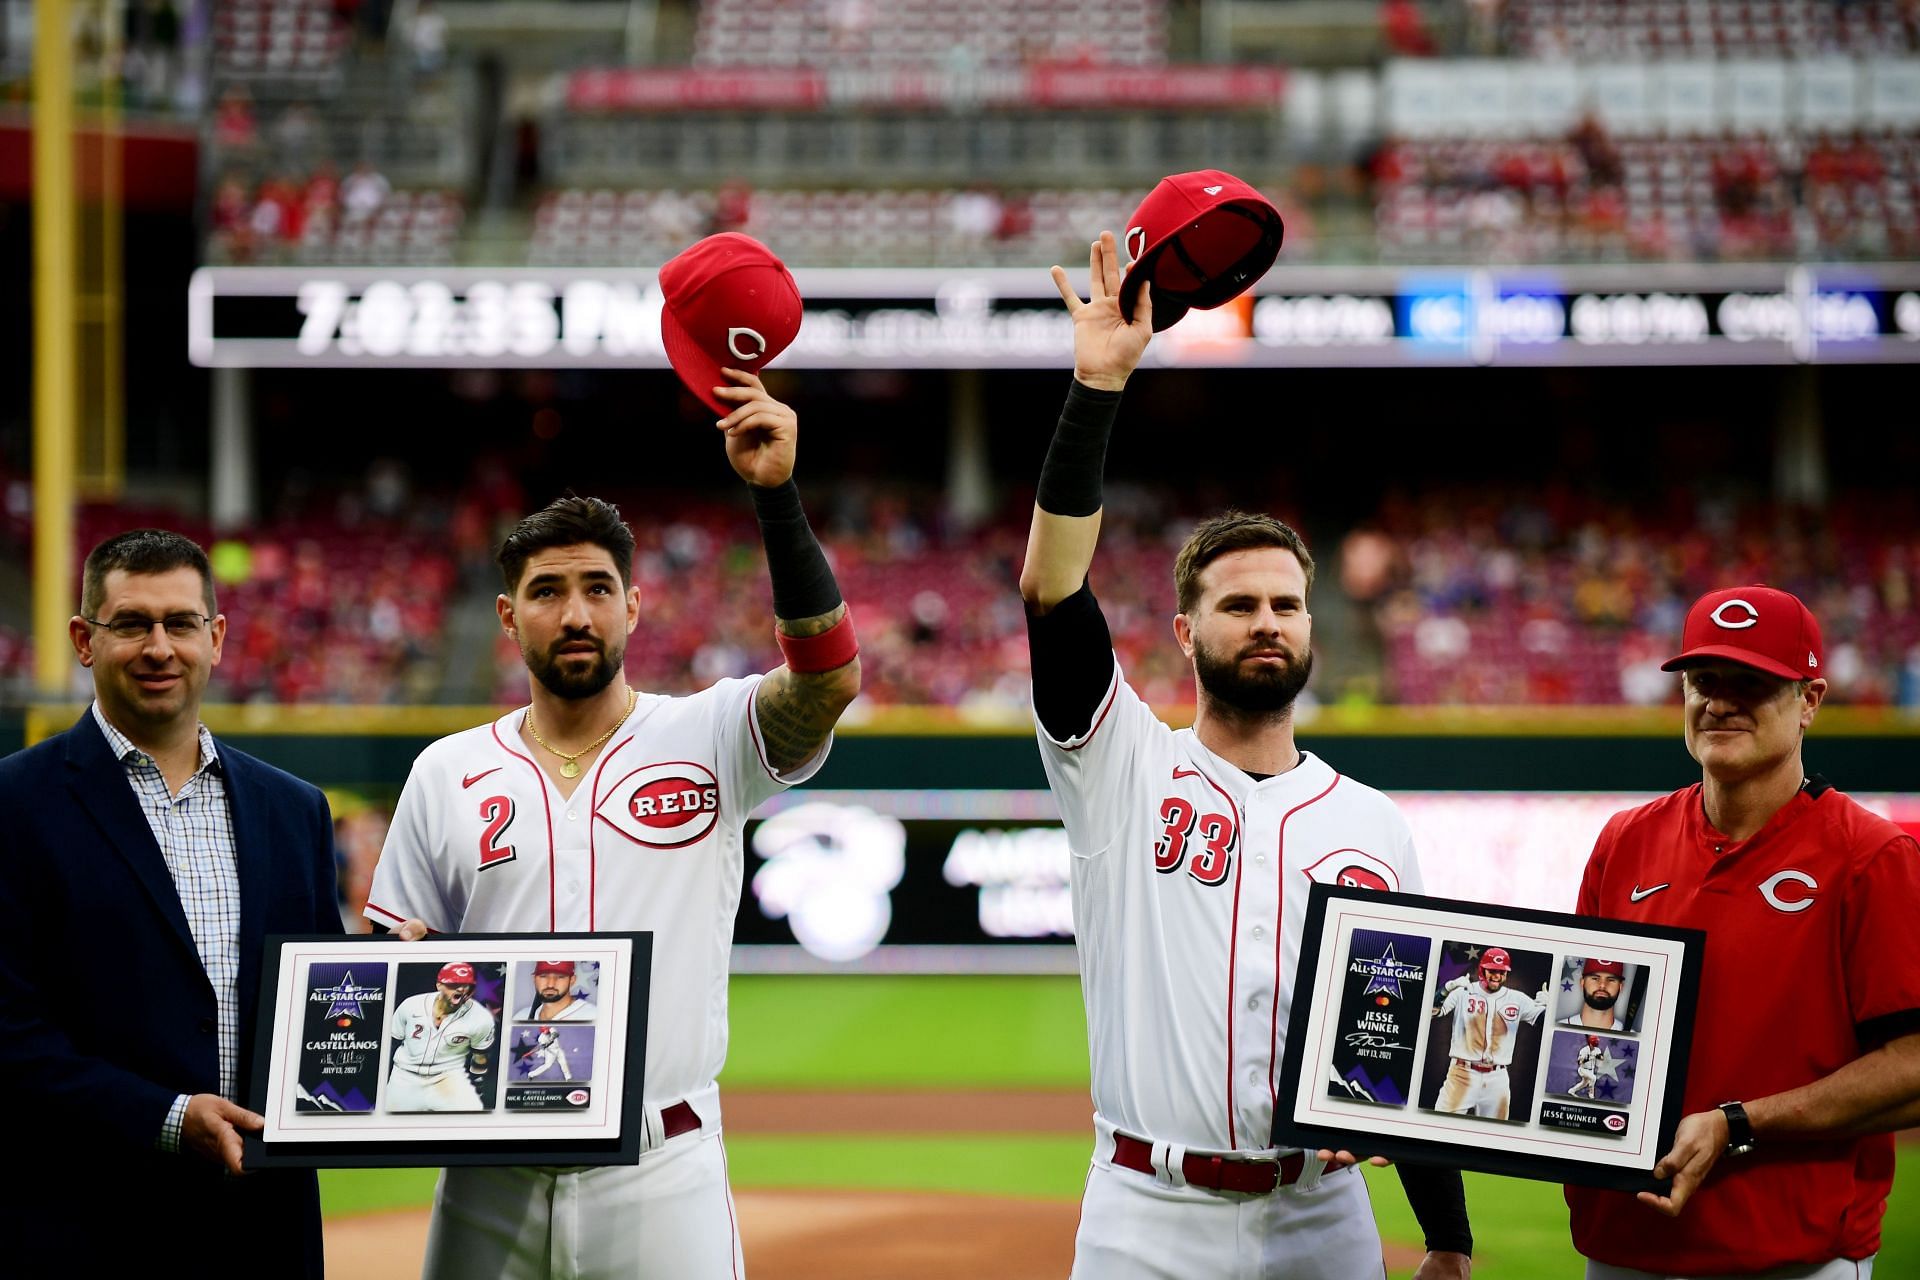 Cincinnati Reds may have a bad record this season, but some of their players could still be All-Stars.